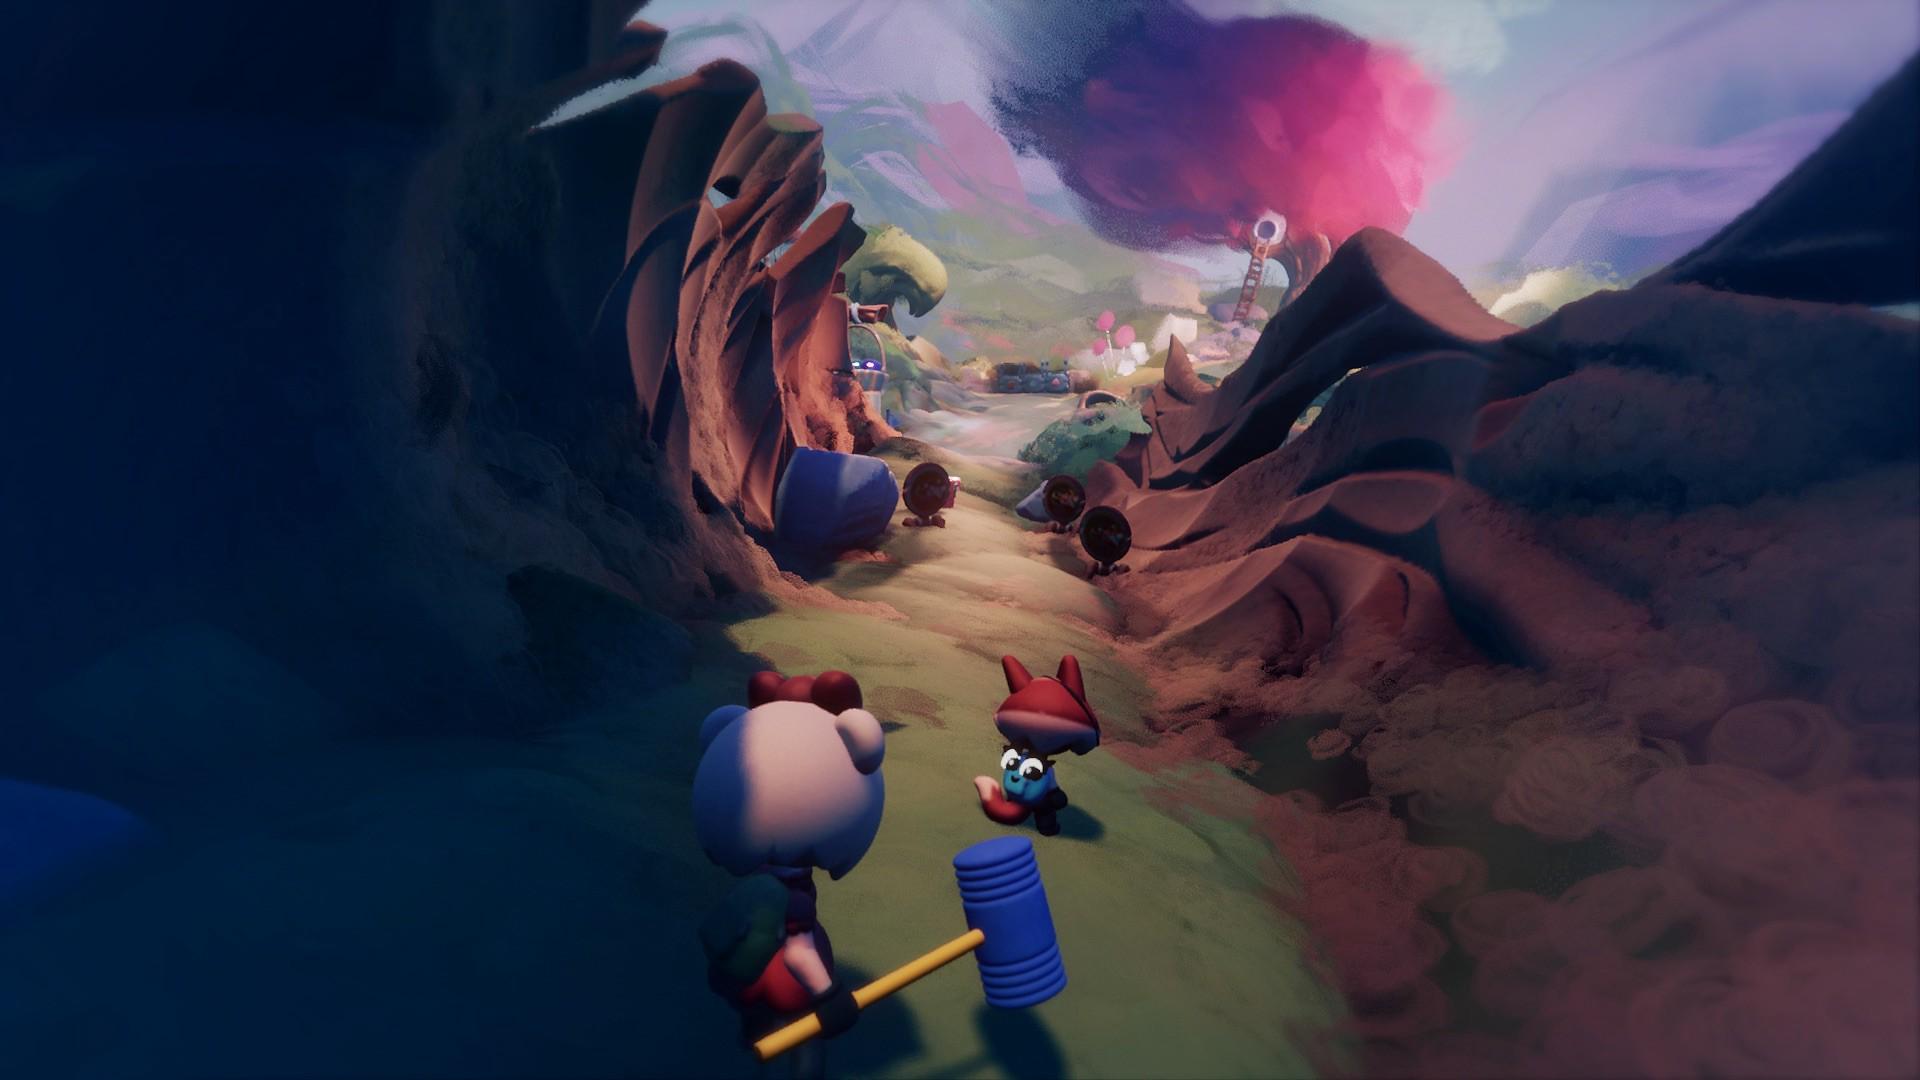 Why isn't Media Molecule's Dreams out yet?